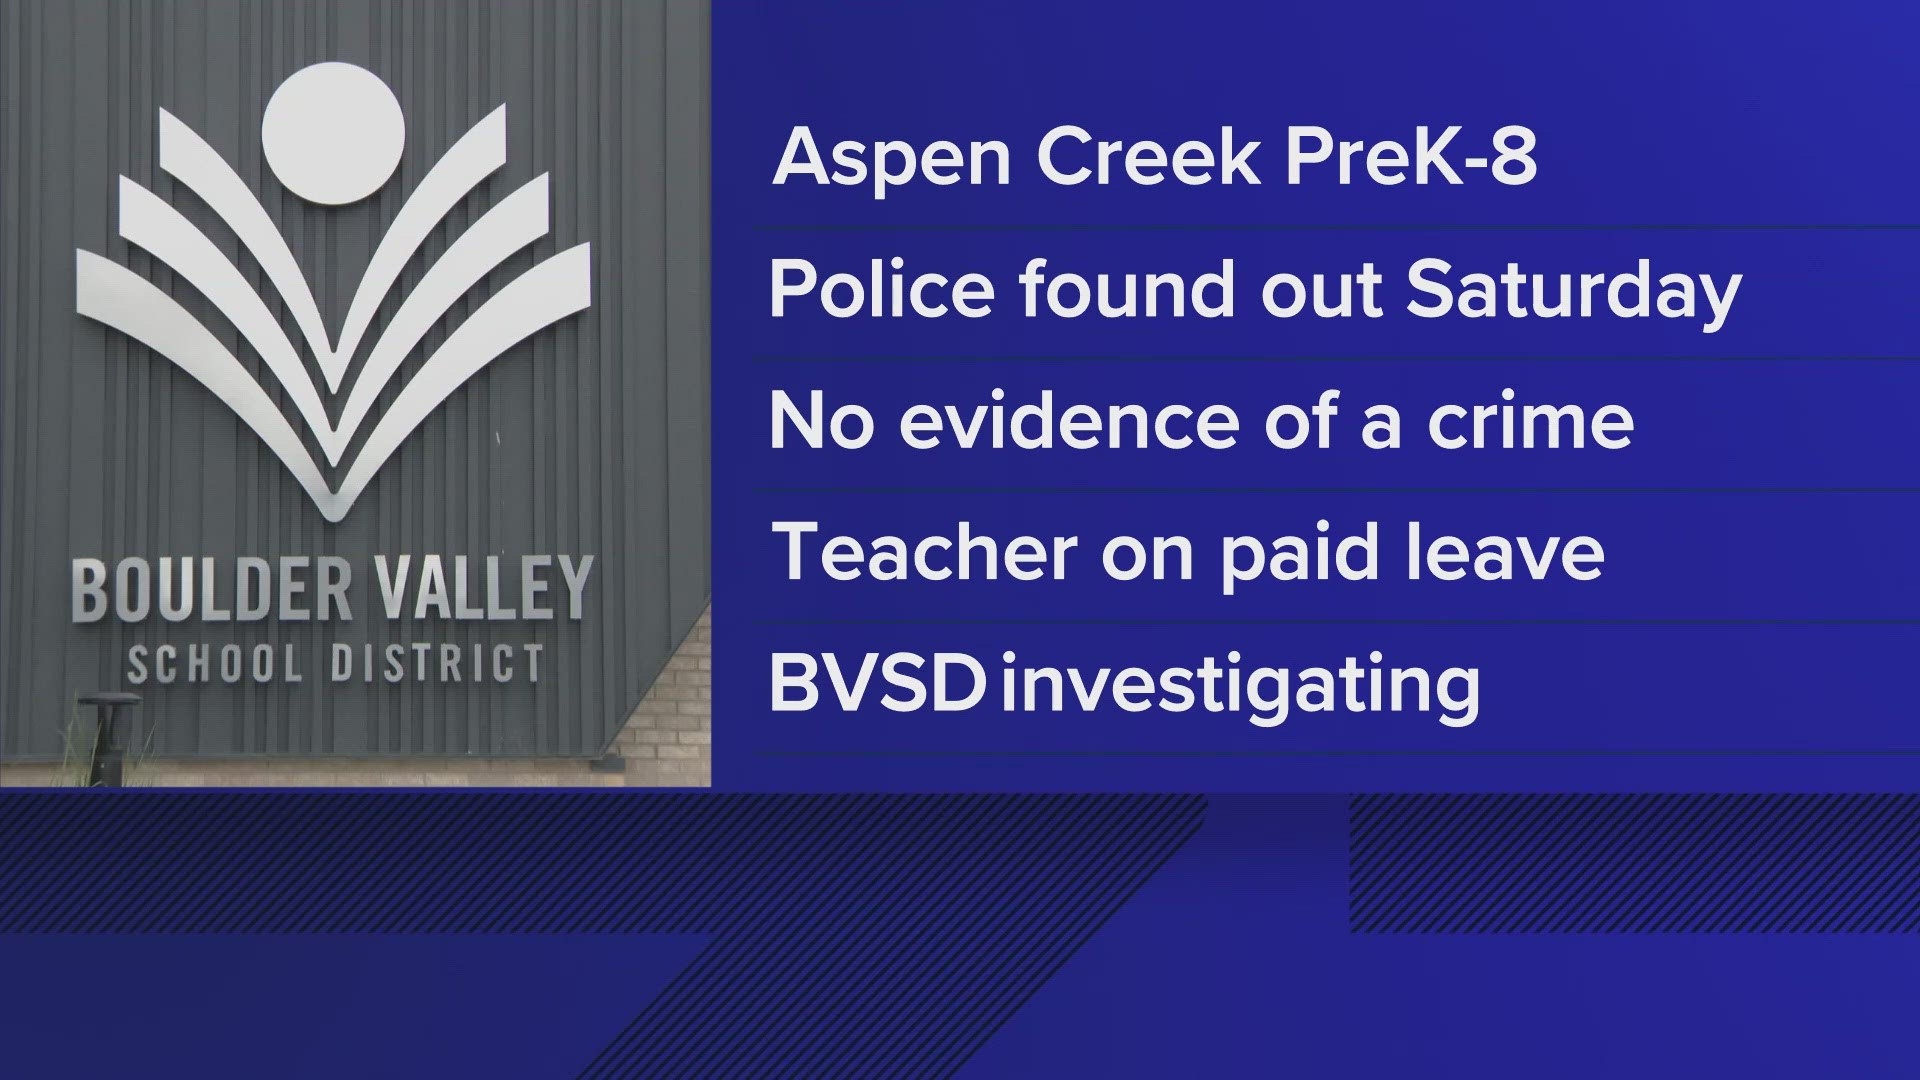 The Boulder Valley School District says the teacher is on leave while they investigate the situation.